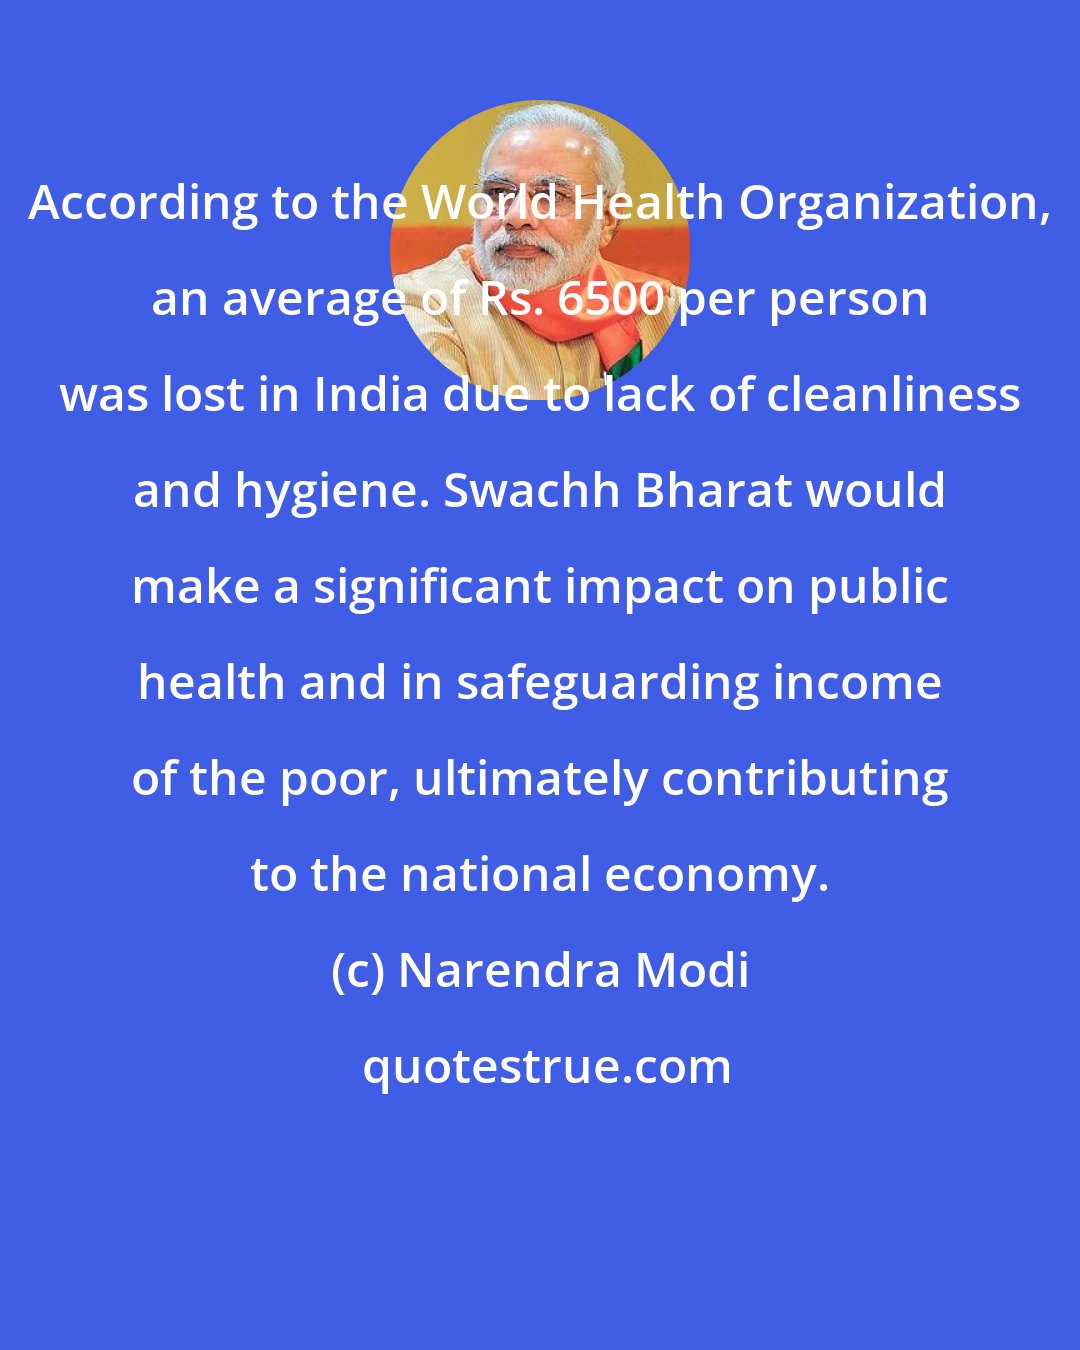 Narendra Modi: According to the World Health Organization, an average of Rs. 6500 per person was lost in India due to lack of cleanliness and hygiene. Swachh Bharat would make a significant impact on public health and in safeguarding income of the poor, ultimately contributing to the national economy.